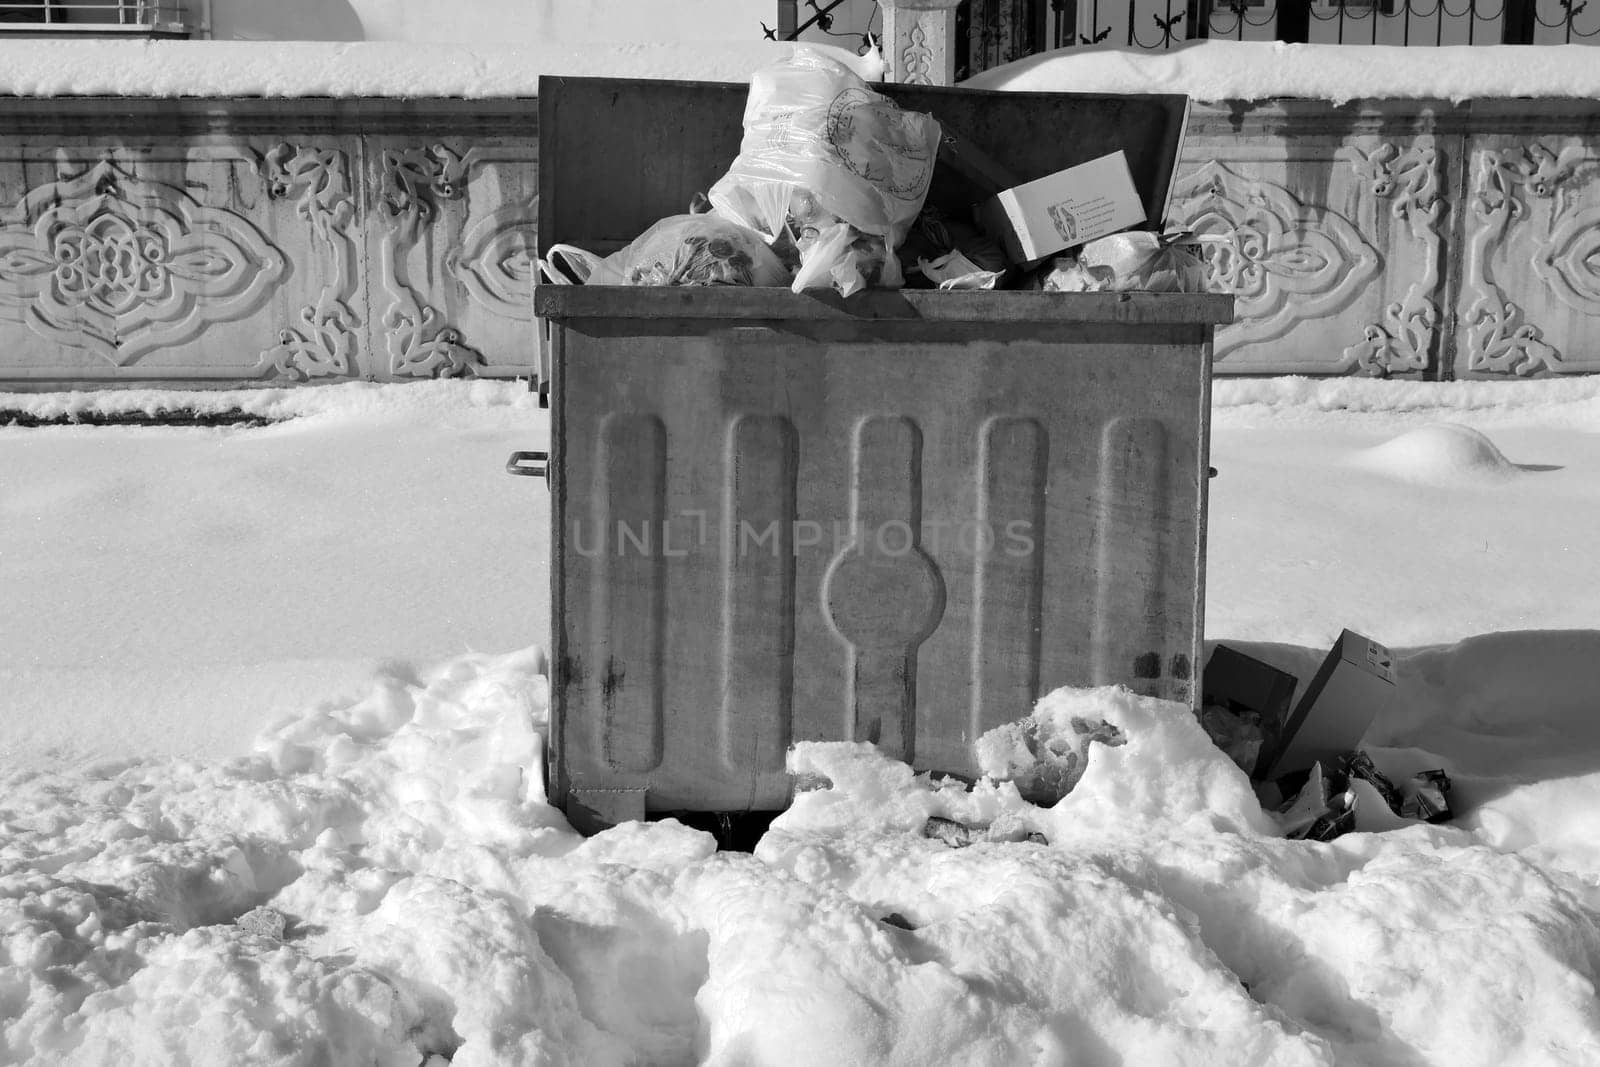 municipal cleaning works disrupted due to snowfall, wastes accumulating in garbage cans,